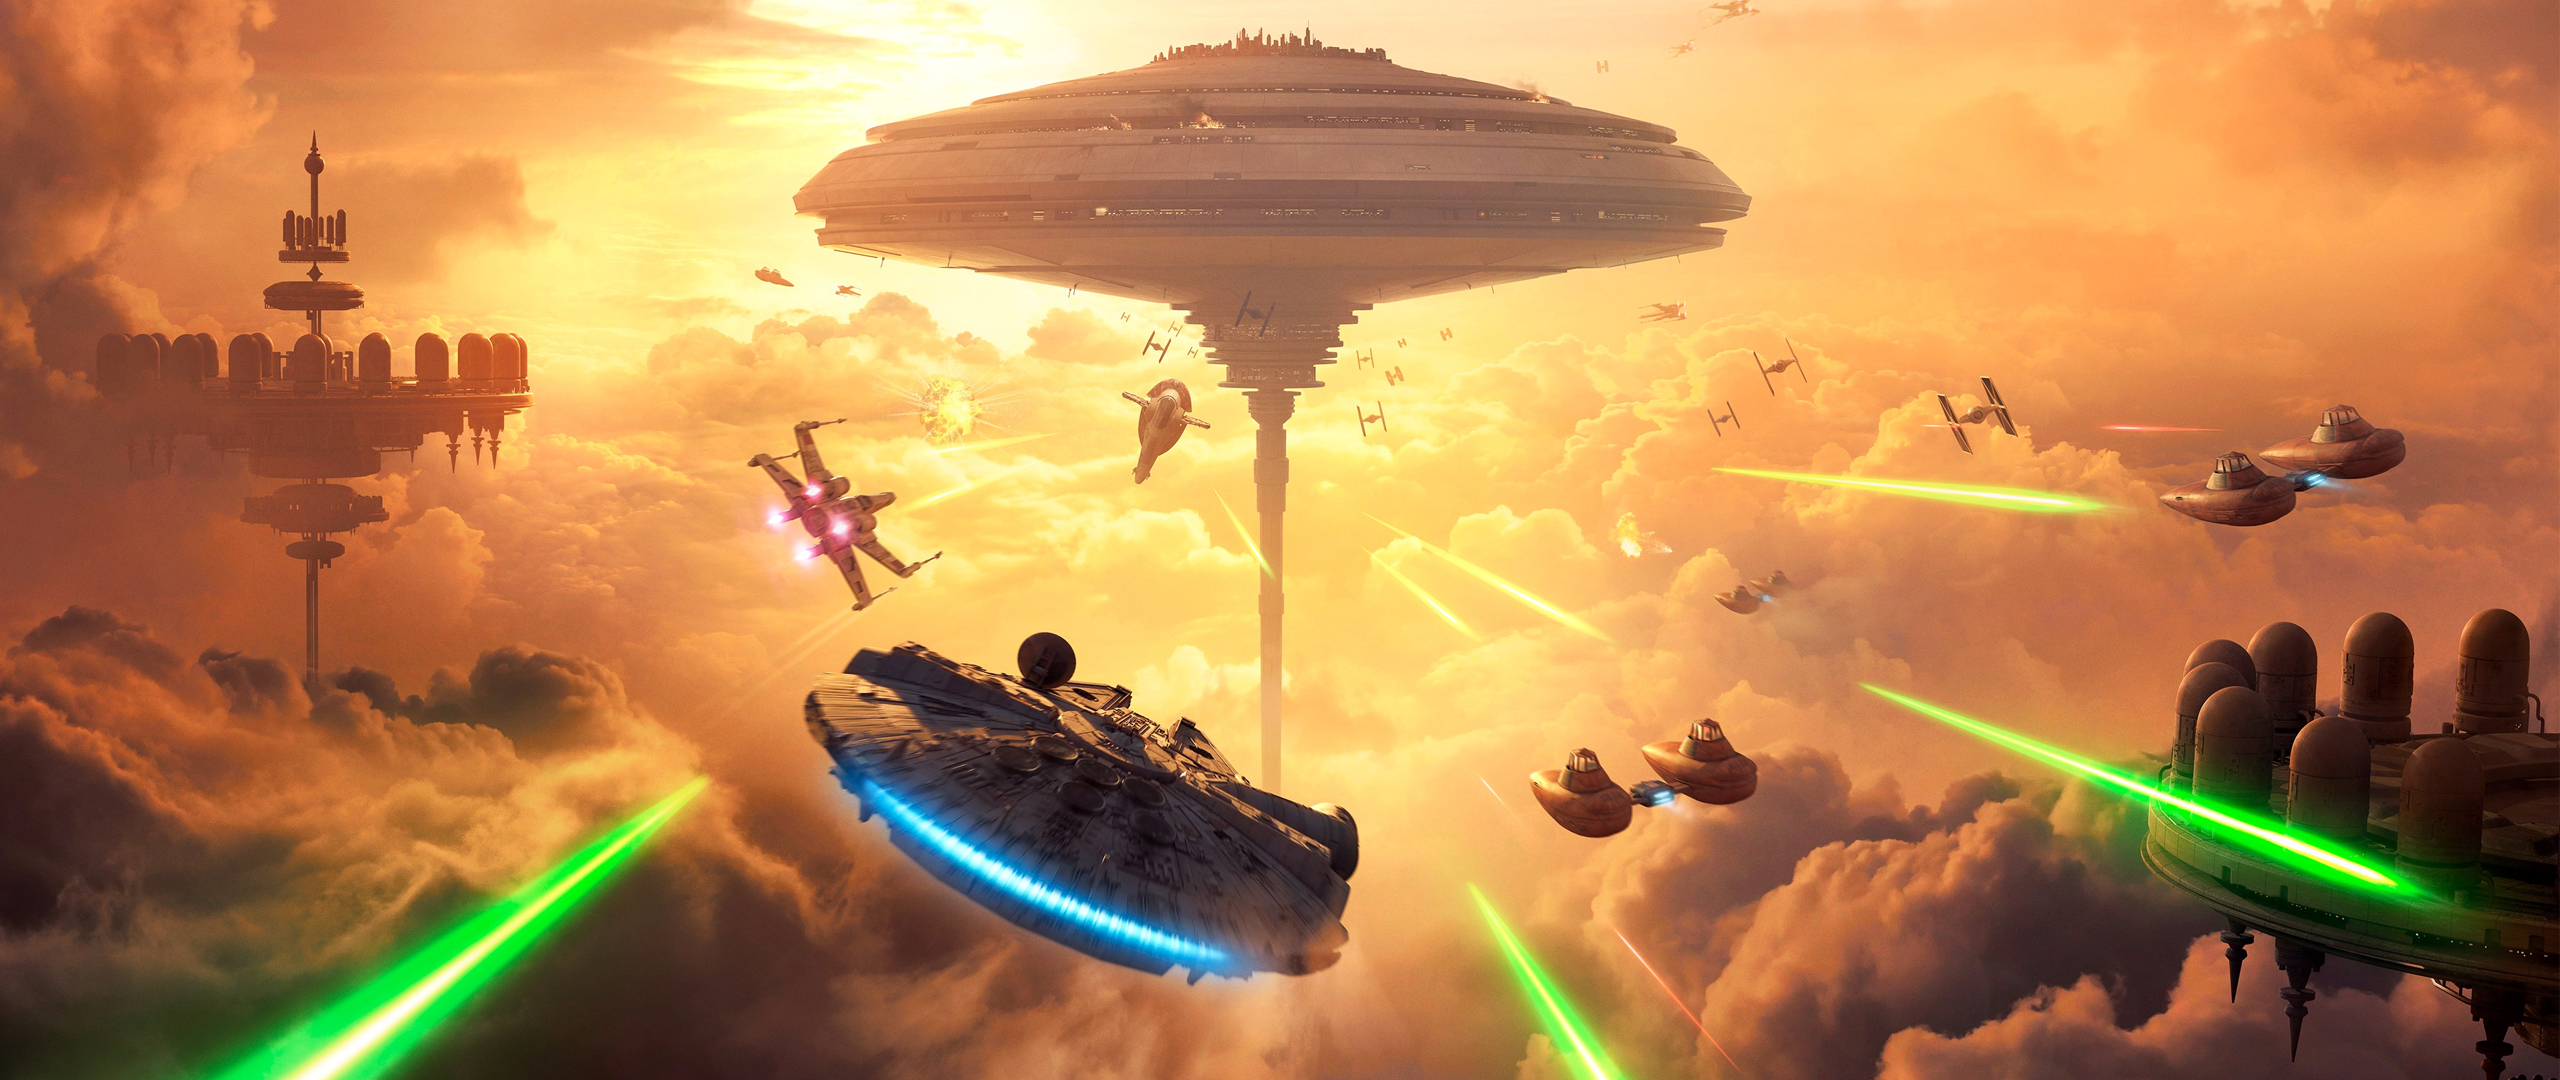 Star Wars Millennium Falcon X Wing Star Wars Ships Bespin Cloud City Sky Science Fiction Slave 1 Sta 2560x1080